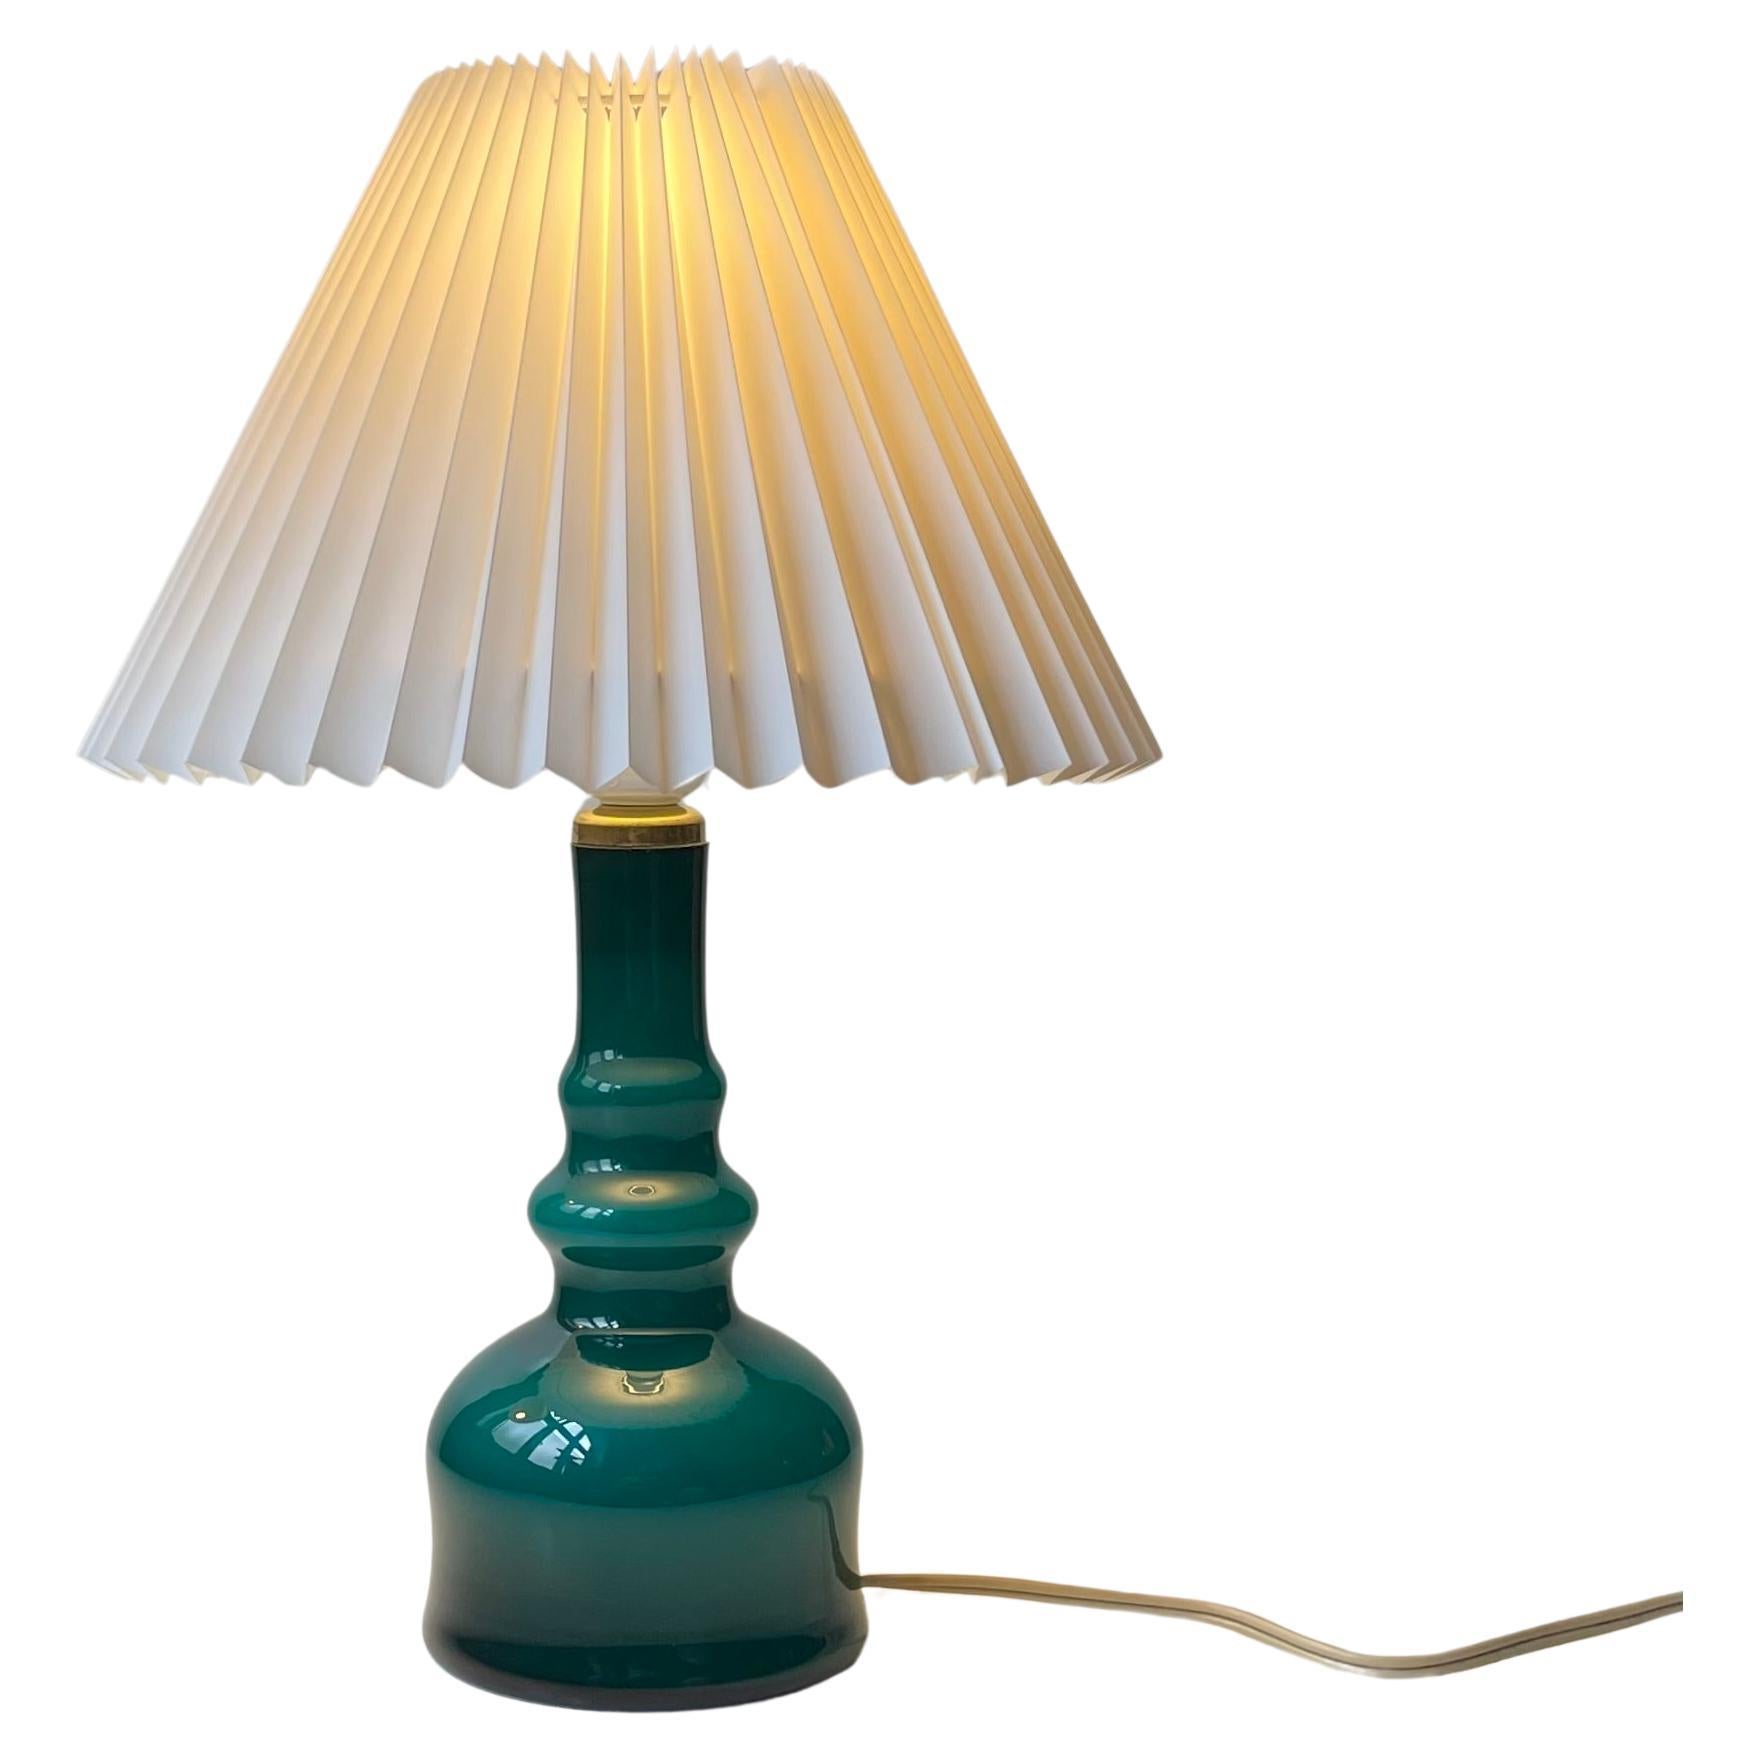 Per Olaf Ström Cased Teal Green Midcentury Table Lamp for Alsterfors, 1960s